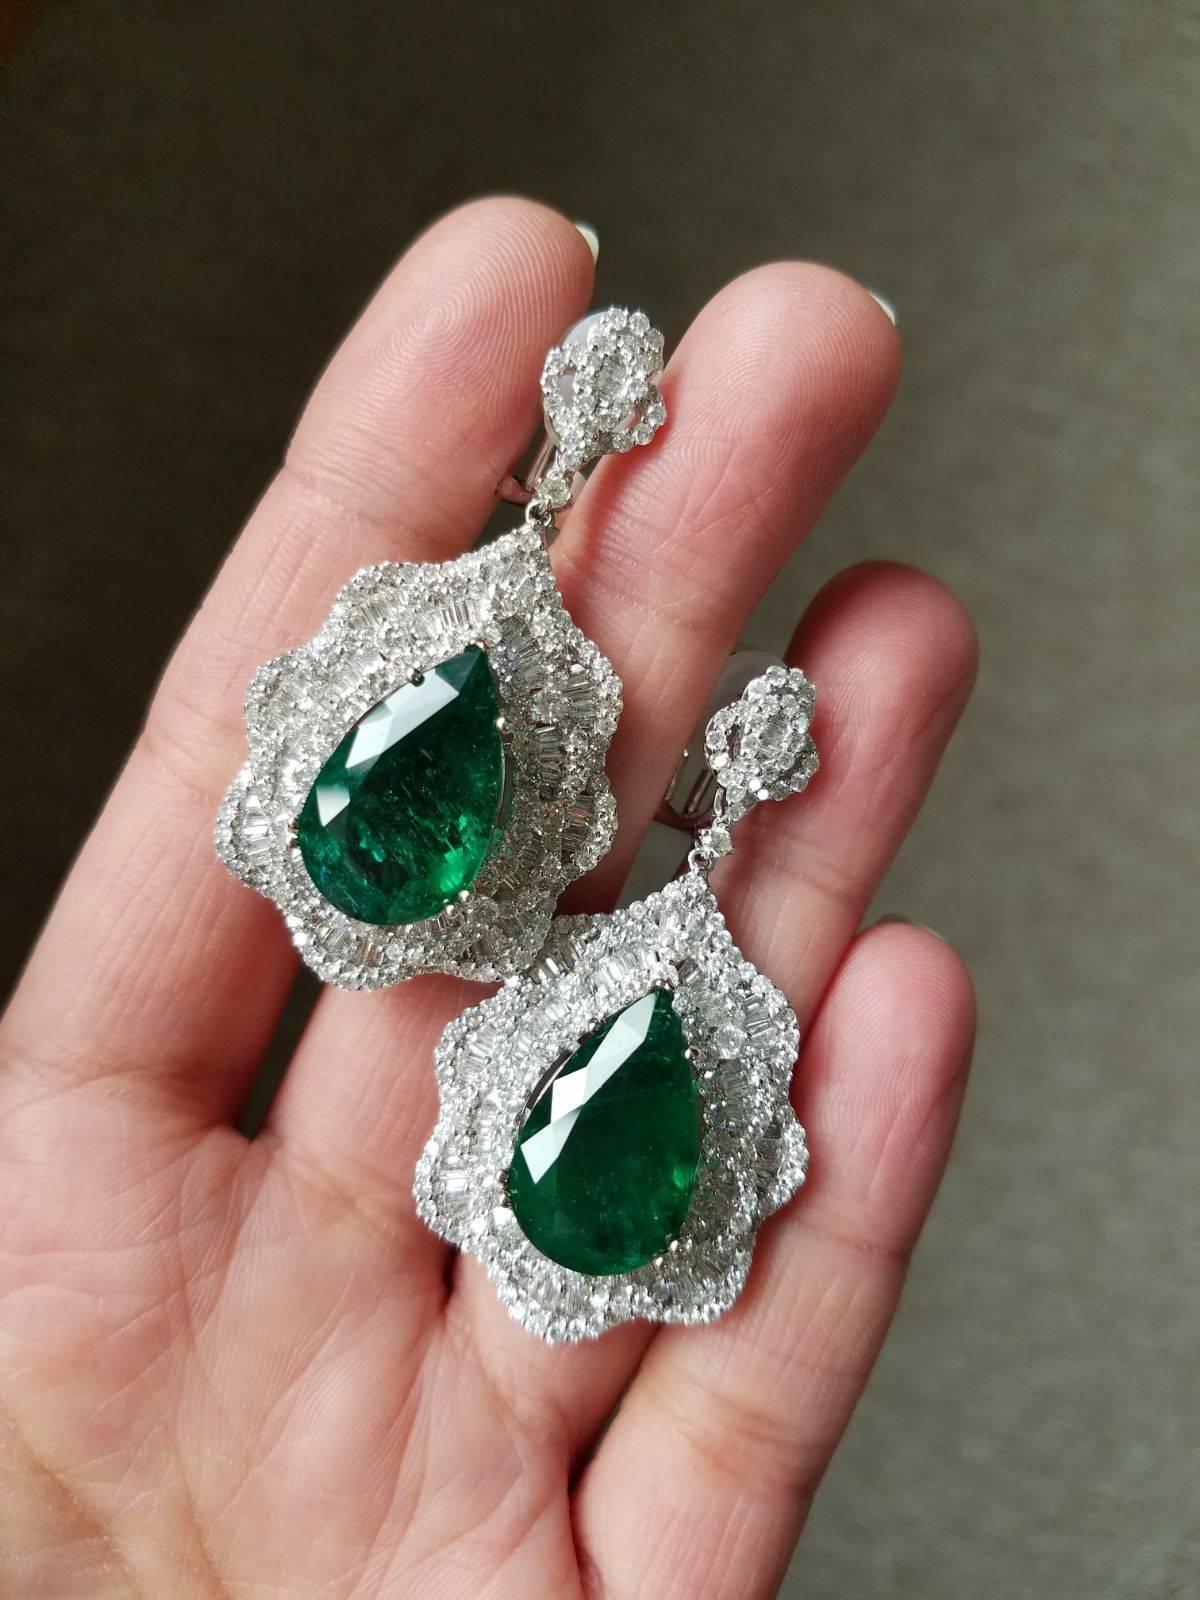 A beautiful pair of statement dangling earrings, using high-quality Zambian Emeralds and Diamonds, all set in 18K white gold. The earrings are not stiff and there is movement in the earrings.

Material Details:

Zambian Emerald - 19.55